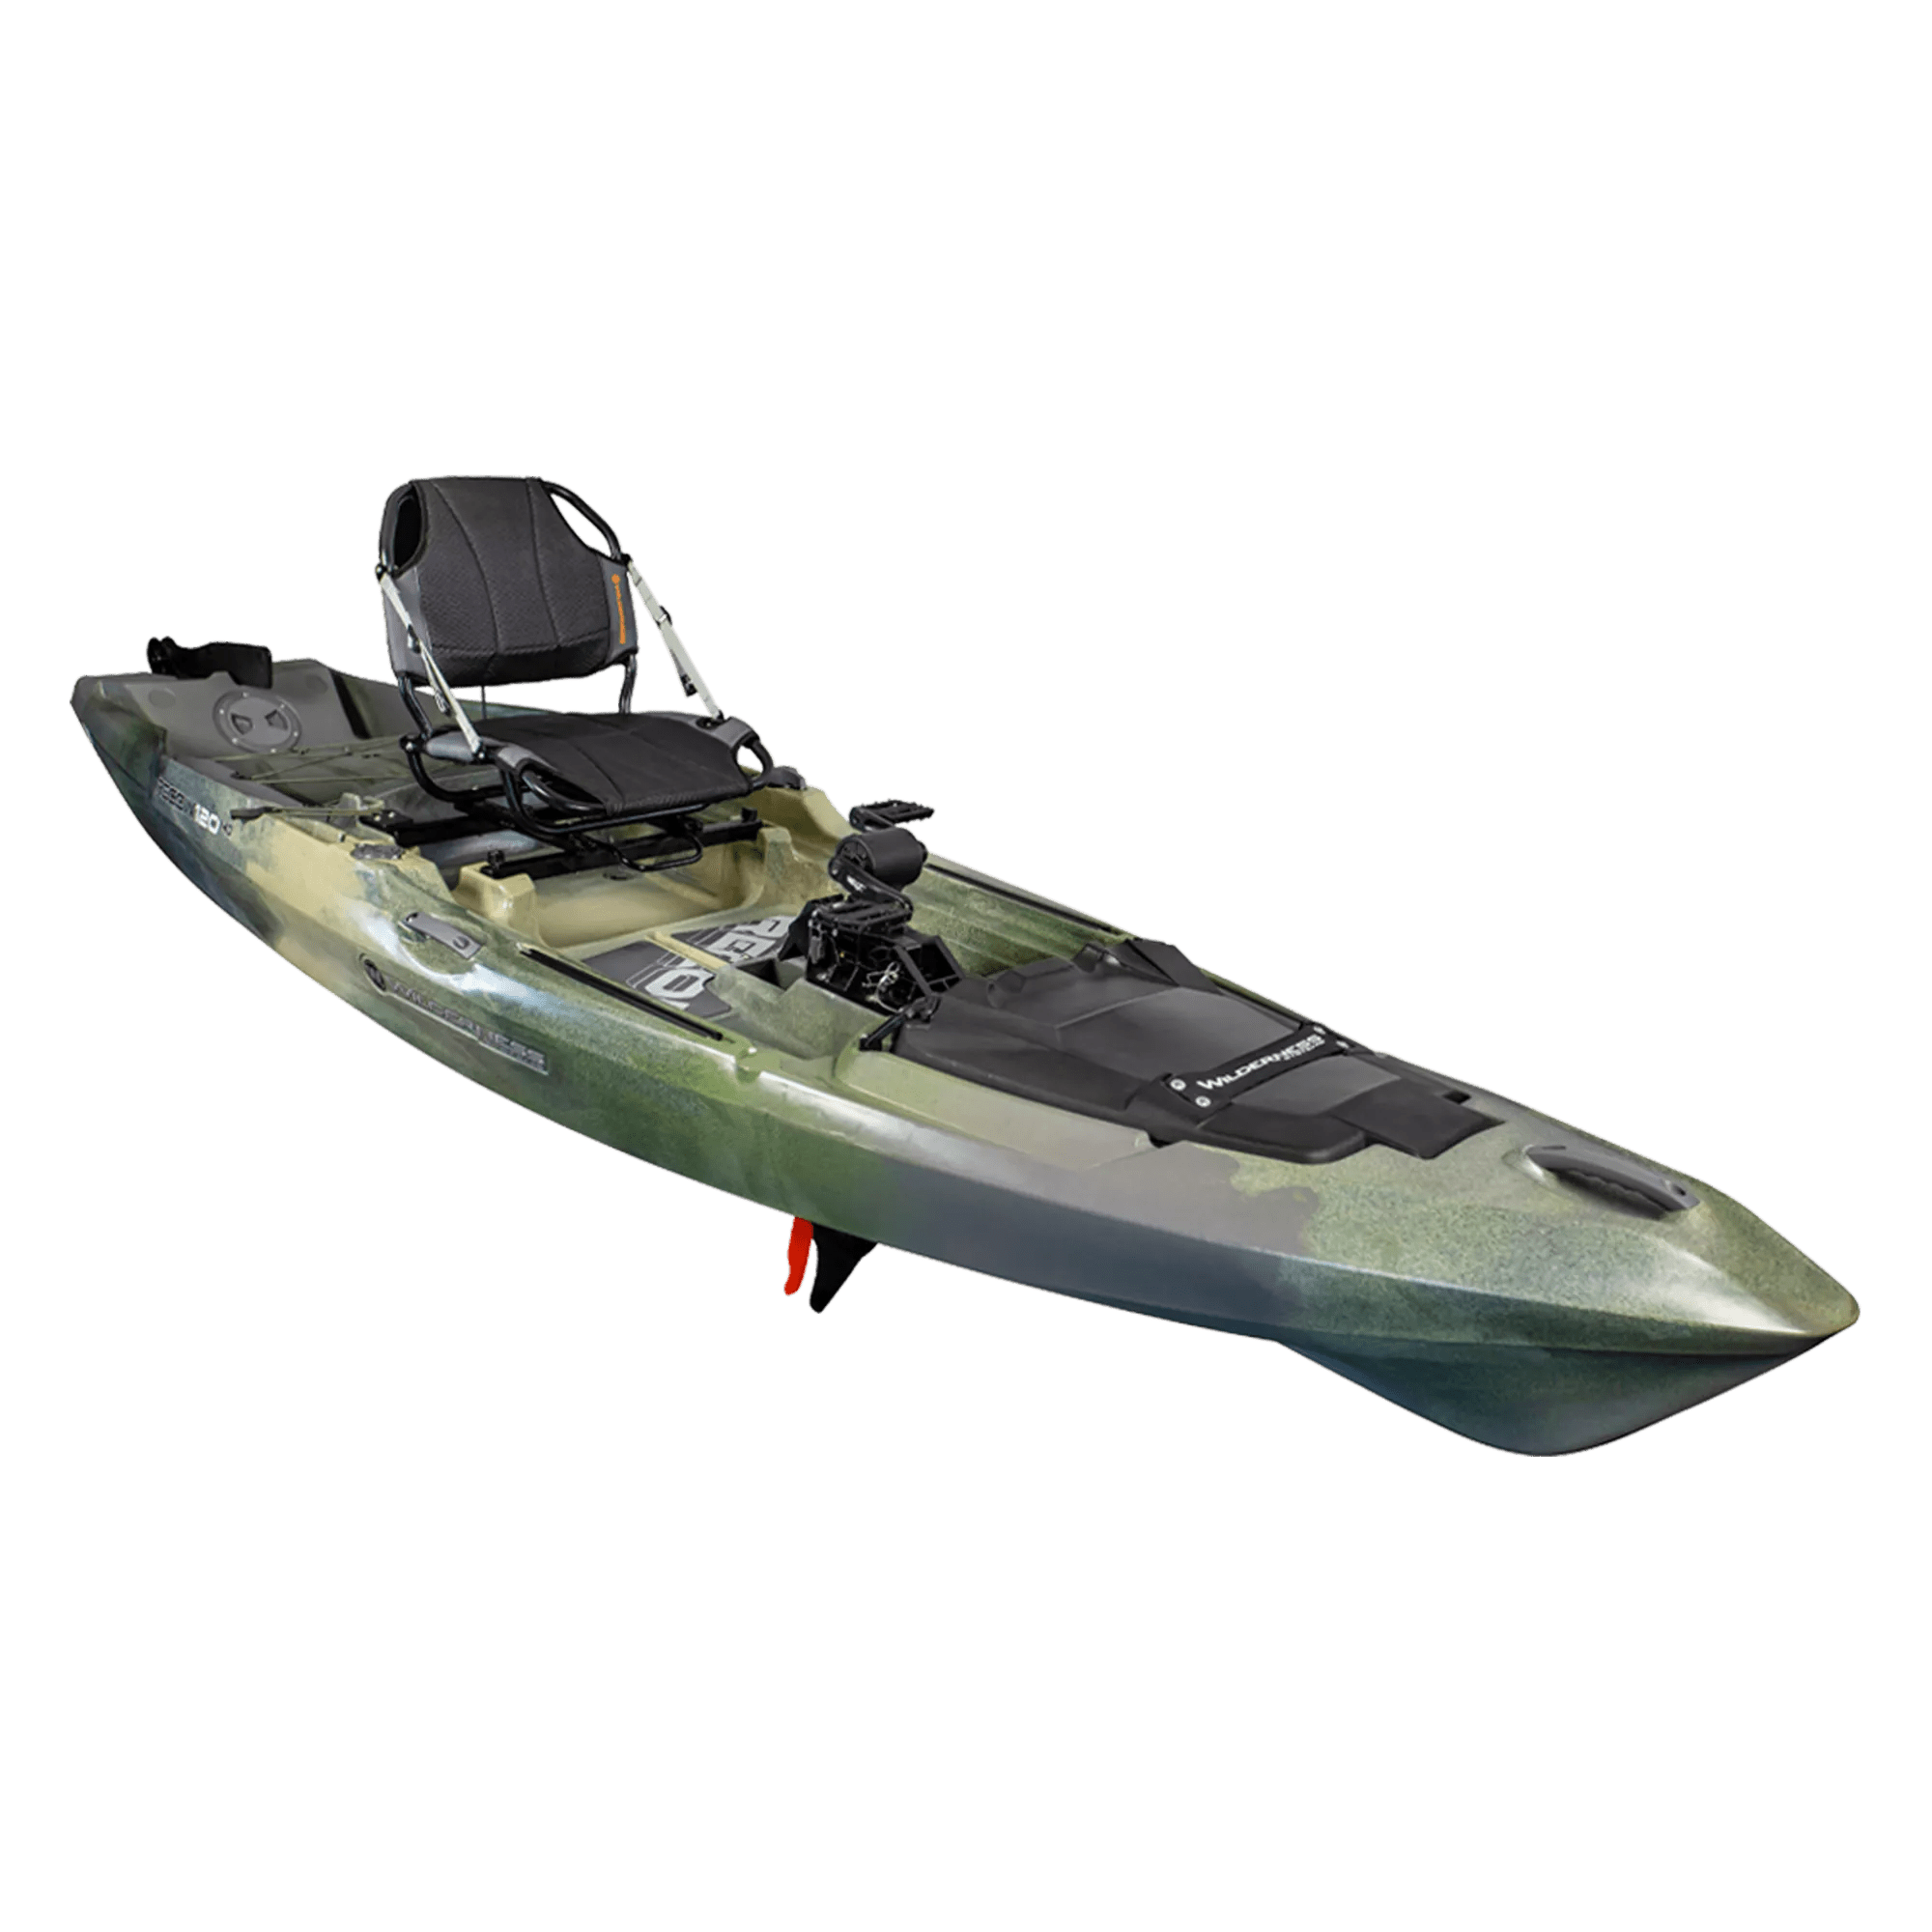 WILDERNESS SYSTEMS - Recon 120 HD Fishing Kayak - Discontinued color/model - Black - 9751090182 - ISO 